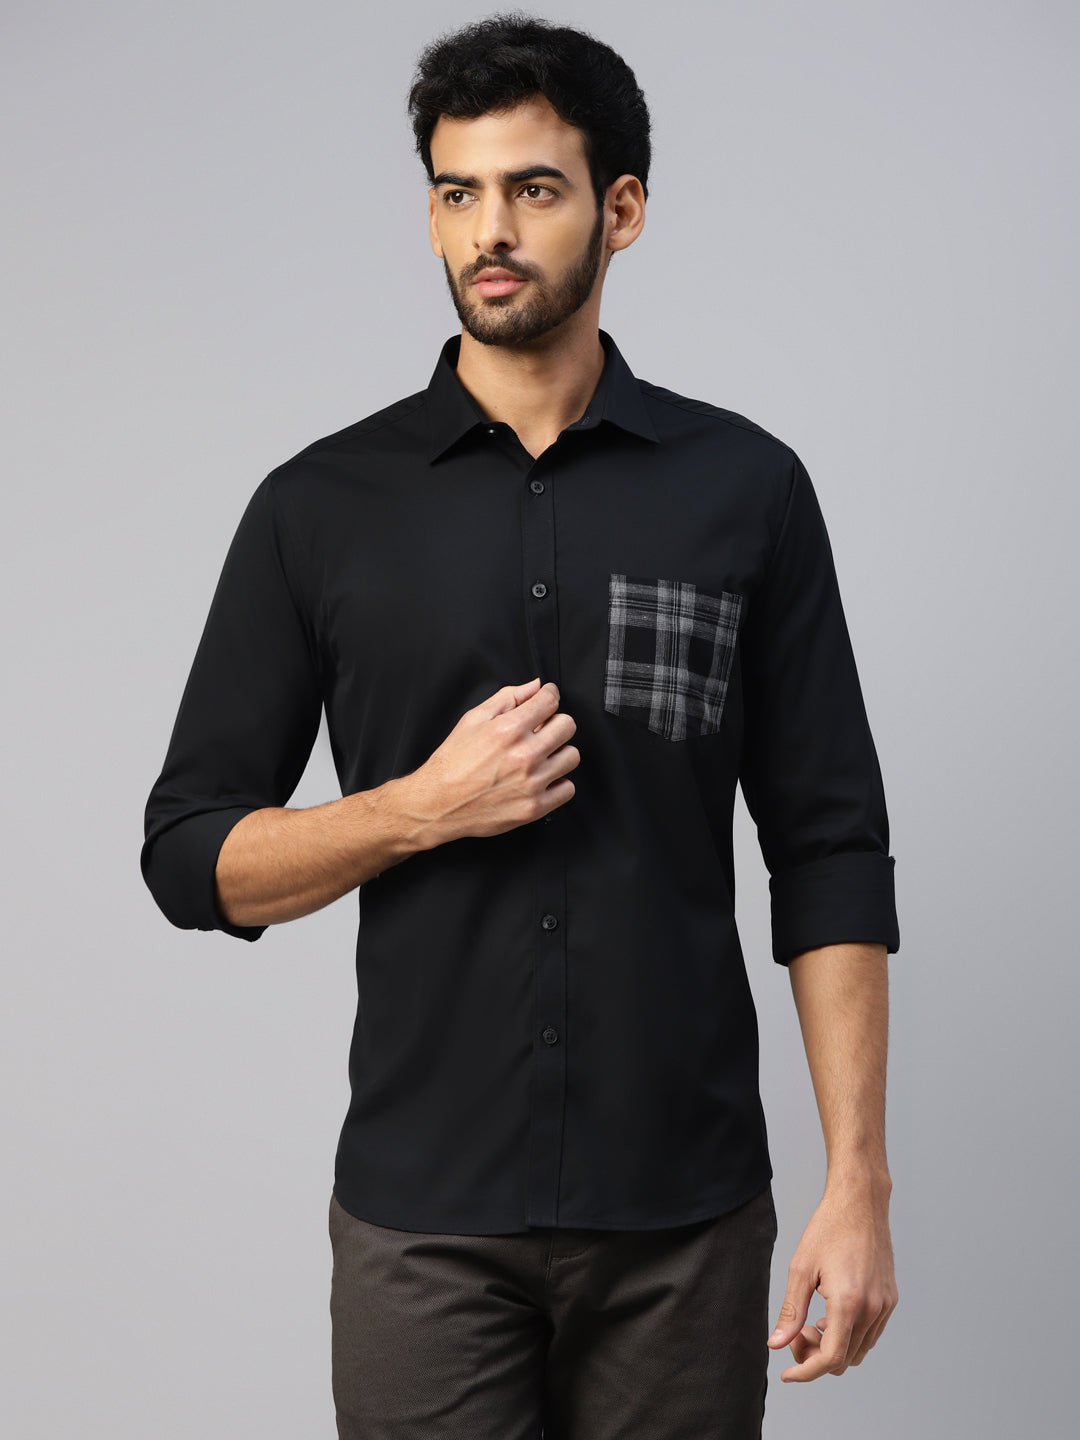 Don Vino Men's Slim Fit Shirt With Contrast Pockets